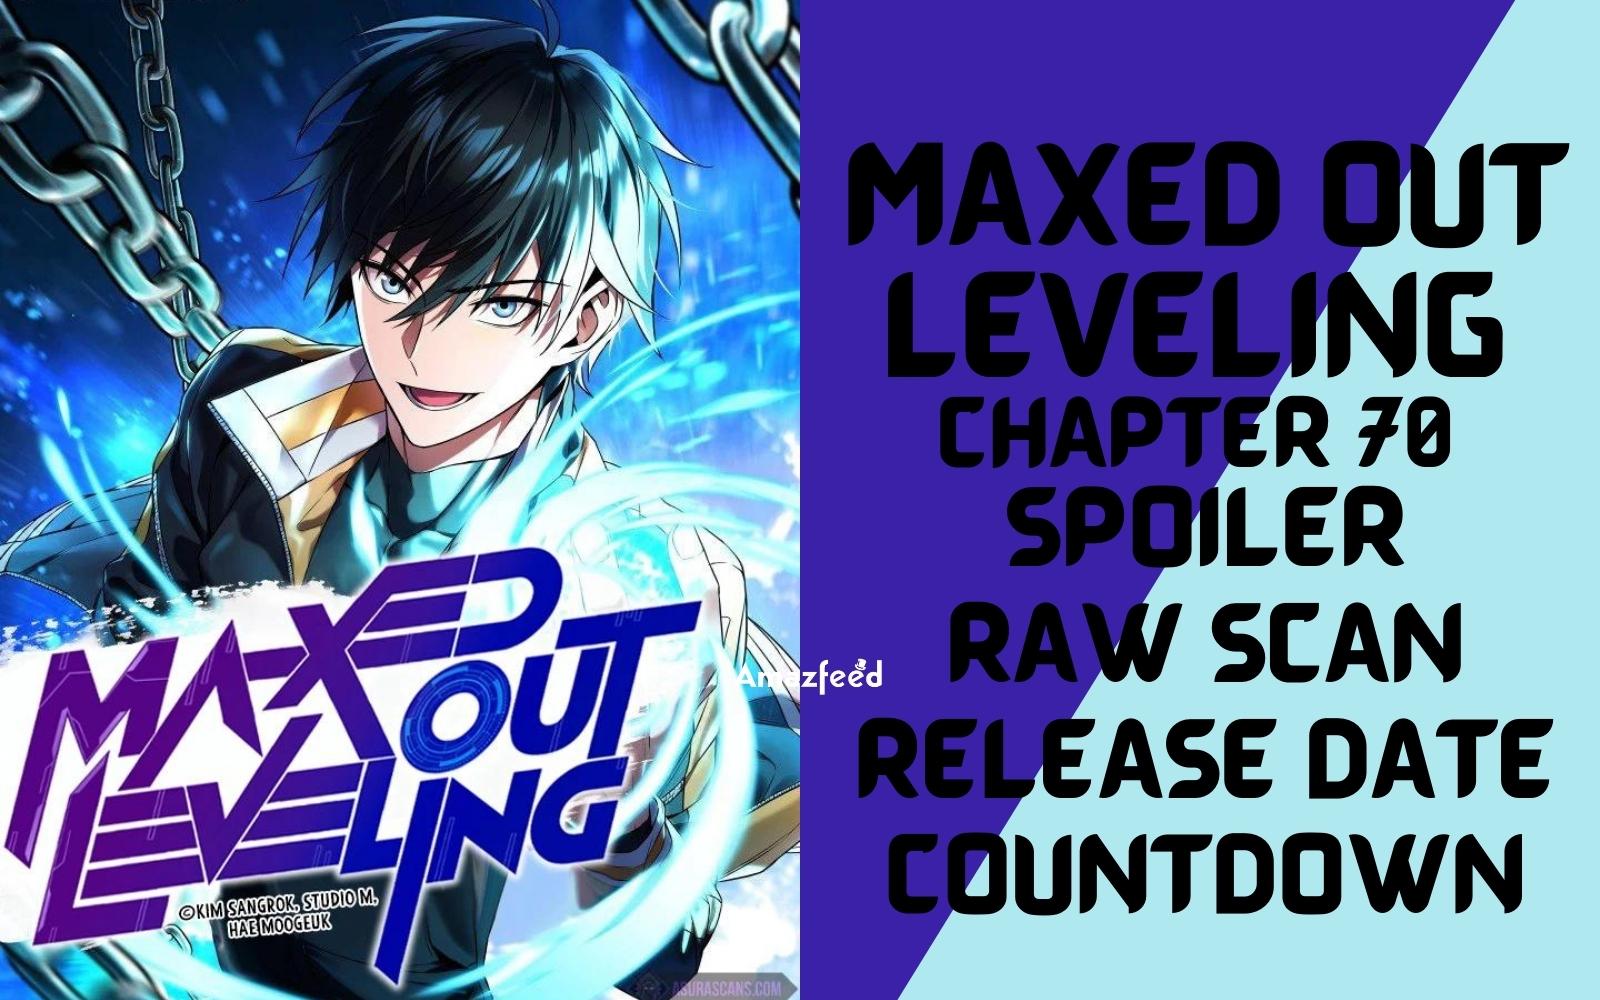 Maxed Out Leveling Chapter 70 Spoiler, Raw Scan, Plot, Color Page, Release Date